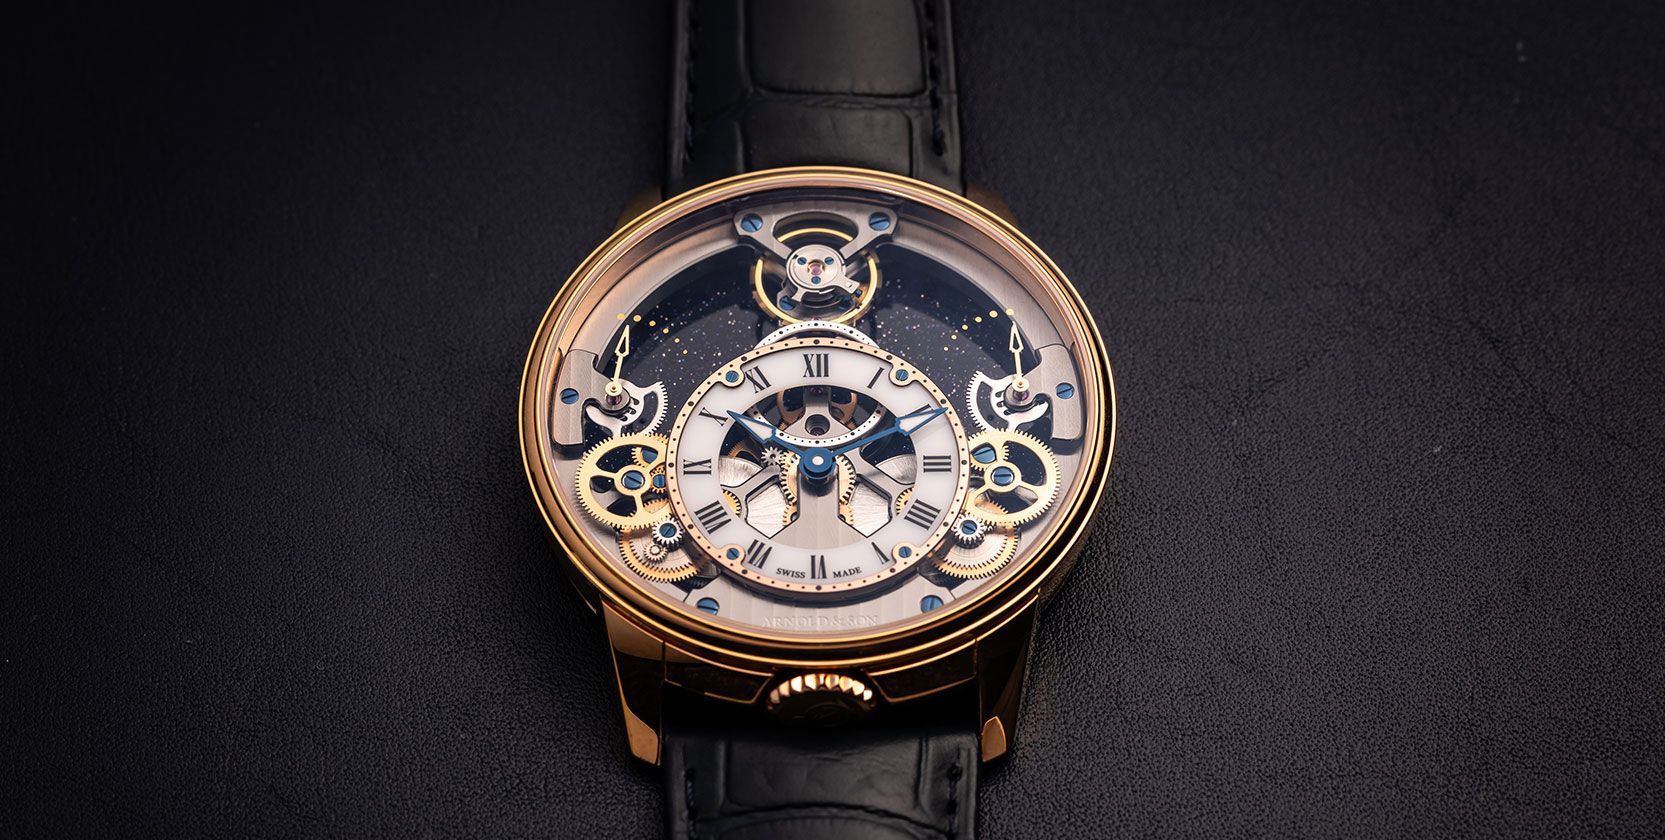 Presenting The Arnold & Son Time Pyramid 42.5 Red Gold